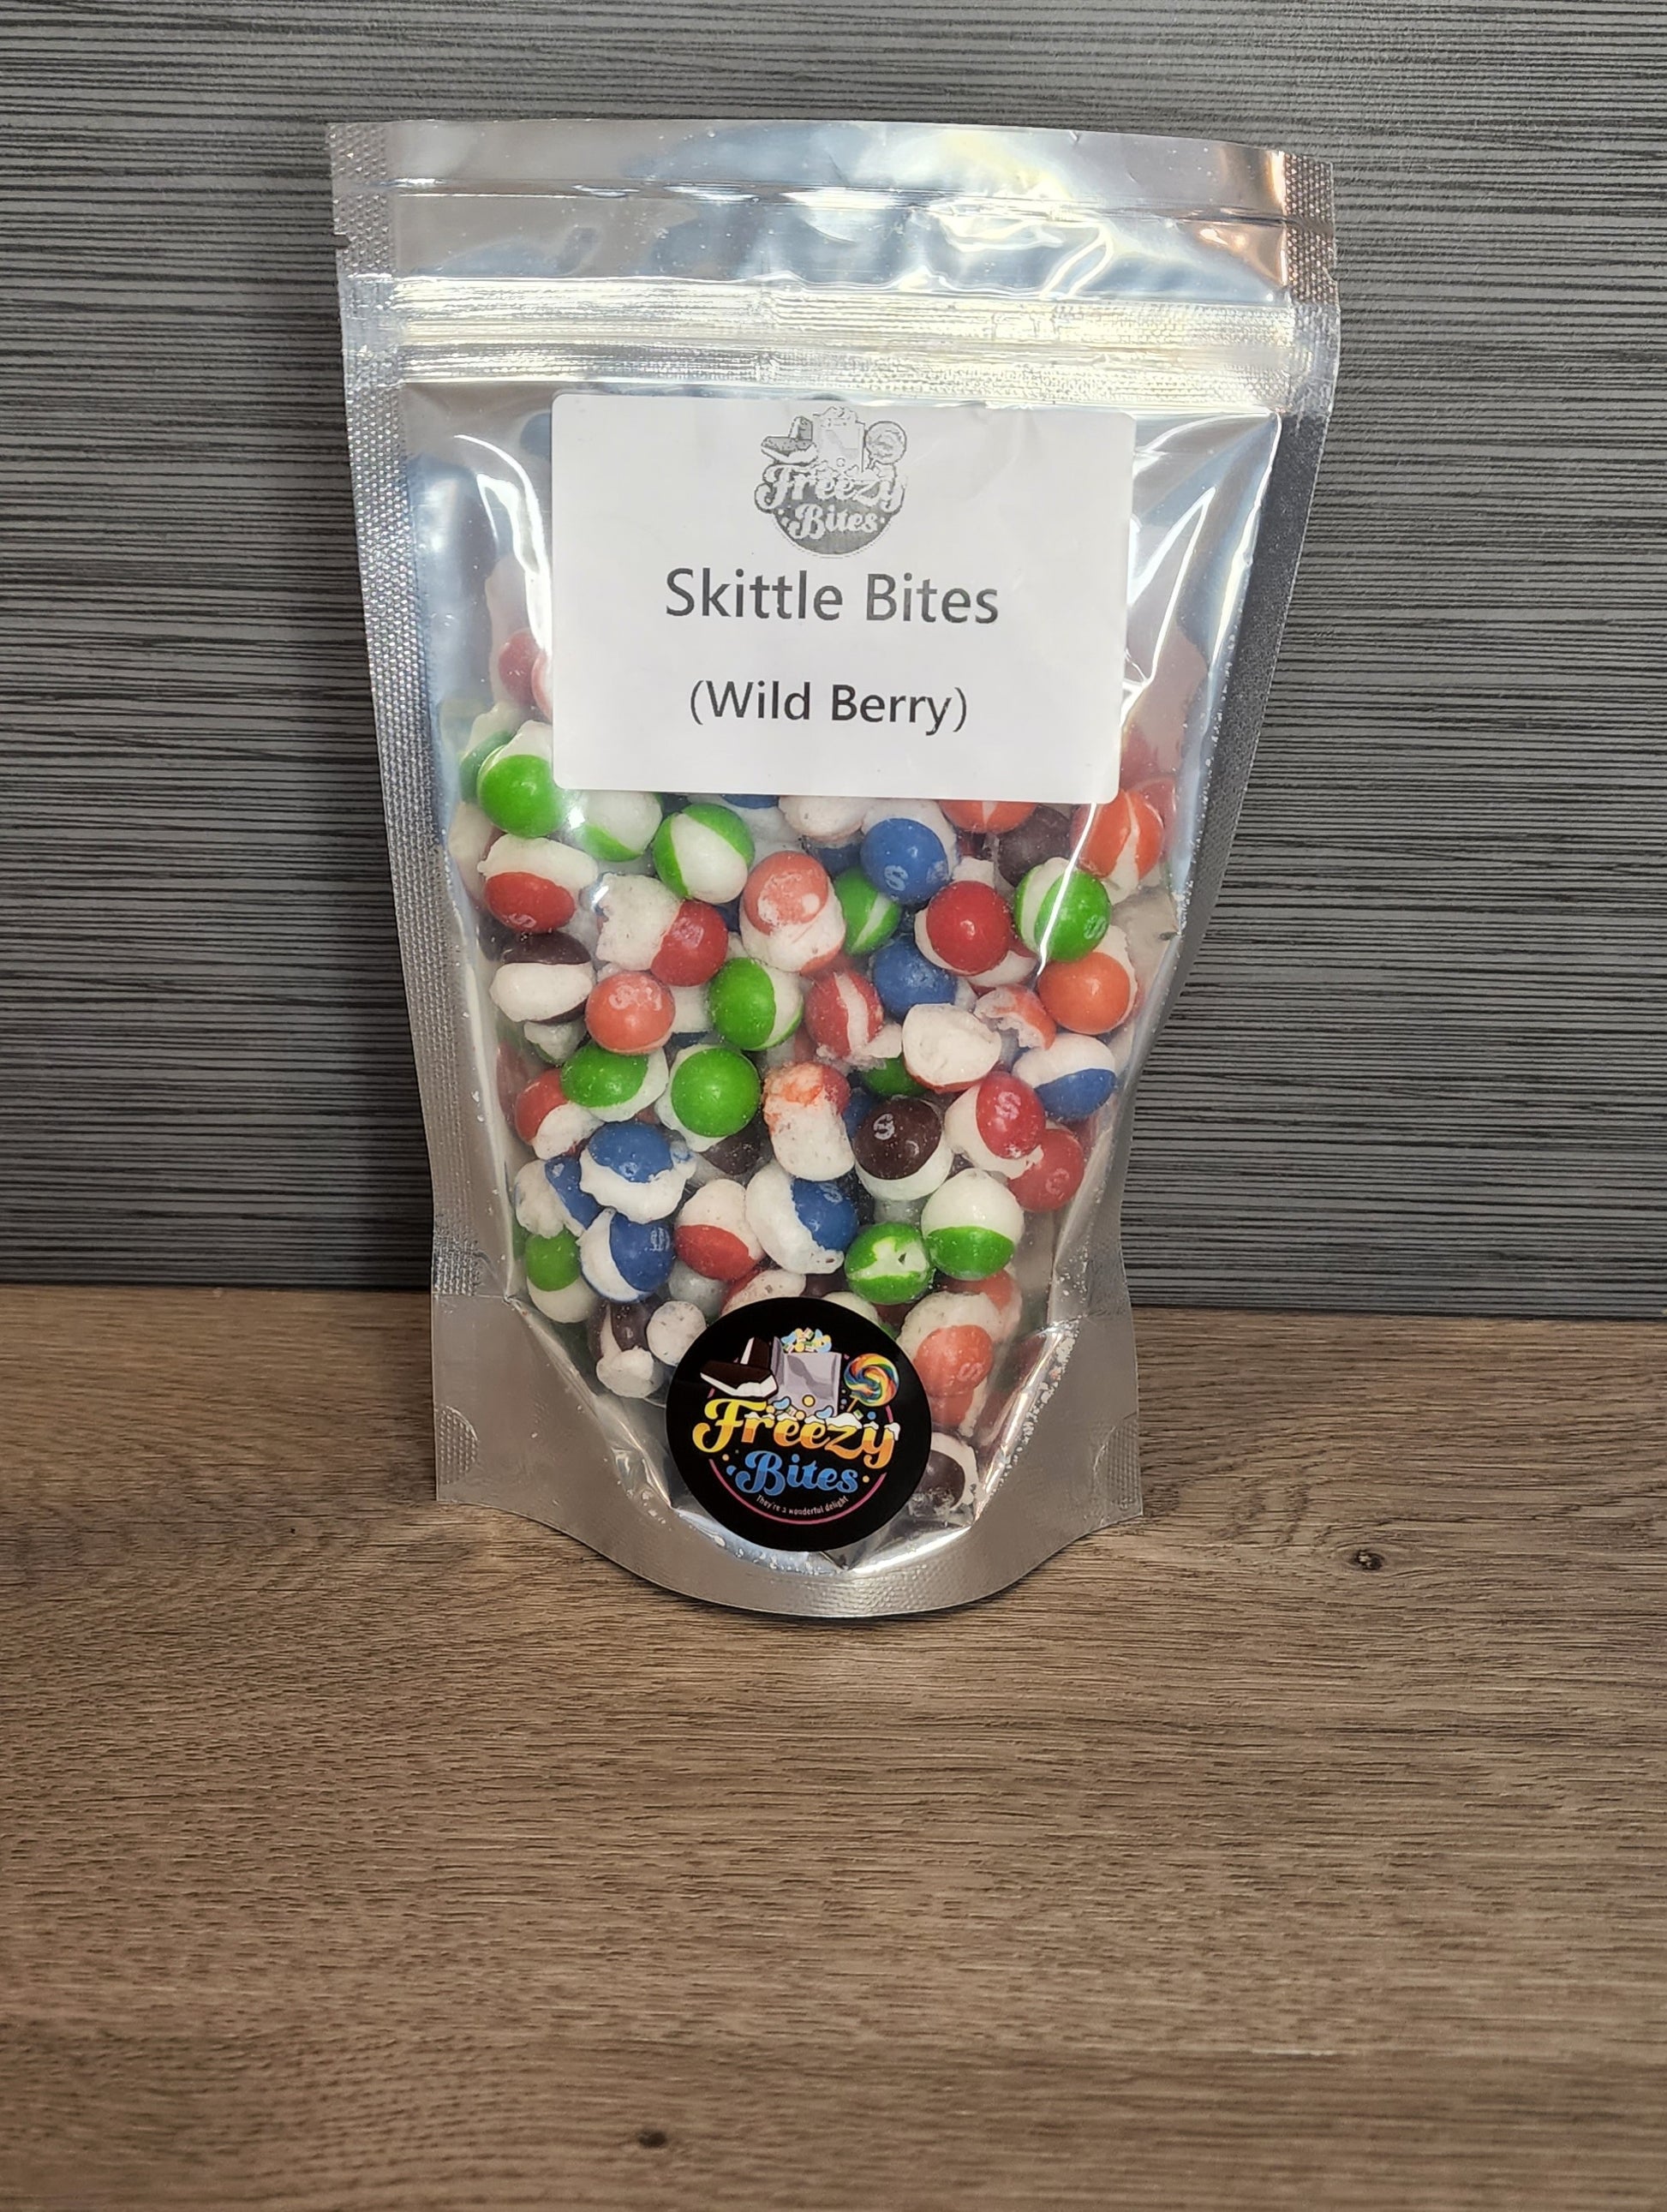 Freeze Dried Candy - Skittles (Wild Berry) – Delight Candy Shop